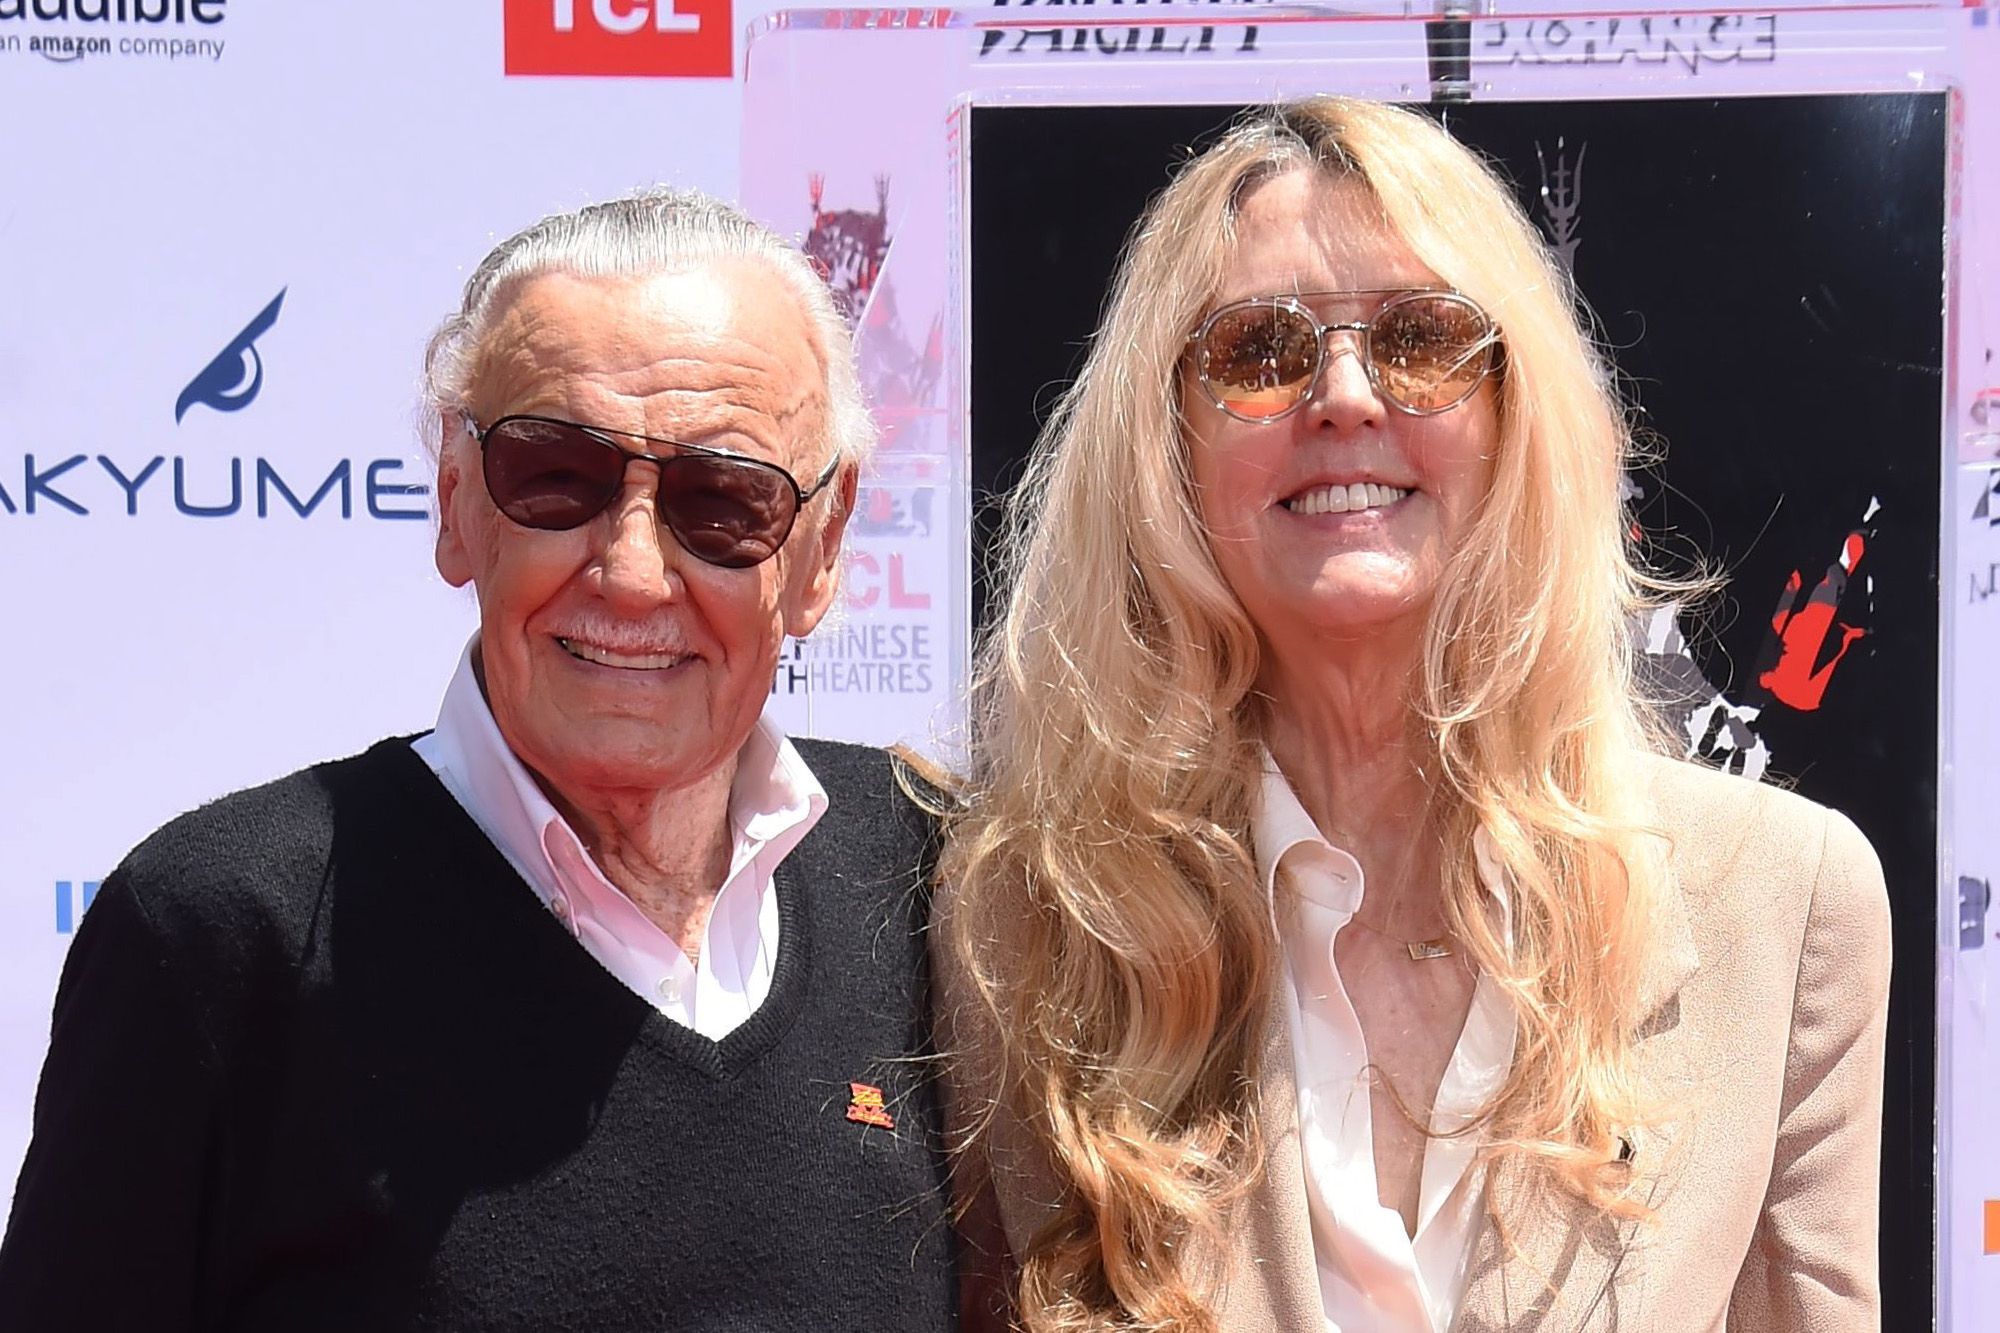 Stan Lee’s daughter charged a file lawsuit in attempt to reclaim his intellectual property